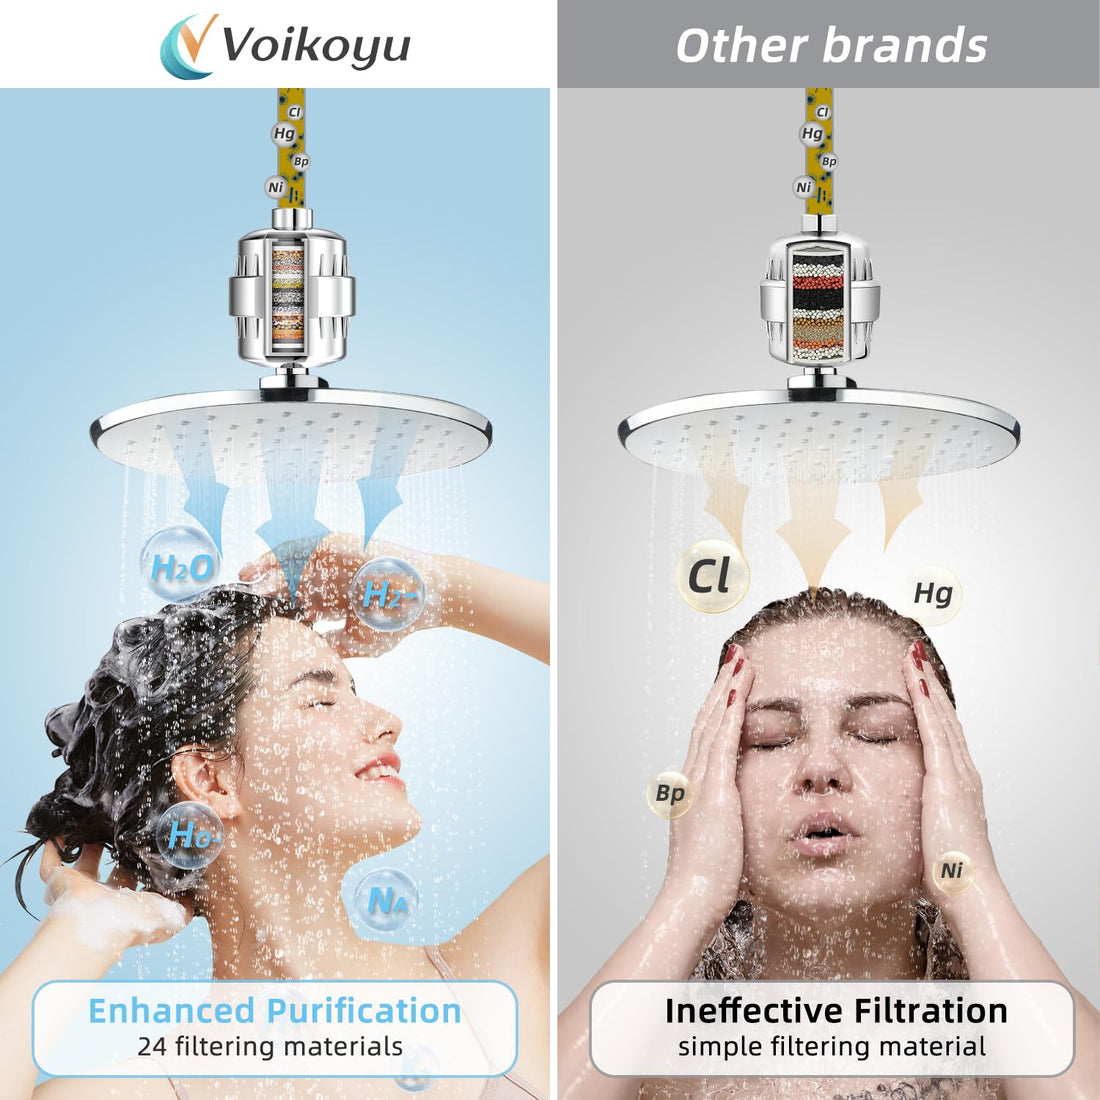 24 Stage Shower Filter - Shower Head Filter for Hard Water Shower Water Filter Protects Your Skin and Hair from Chlorine and Heavy Metals in Water, Chrome